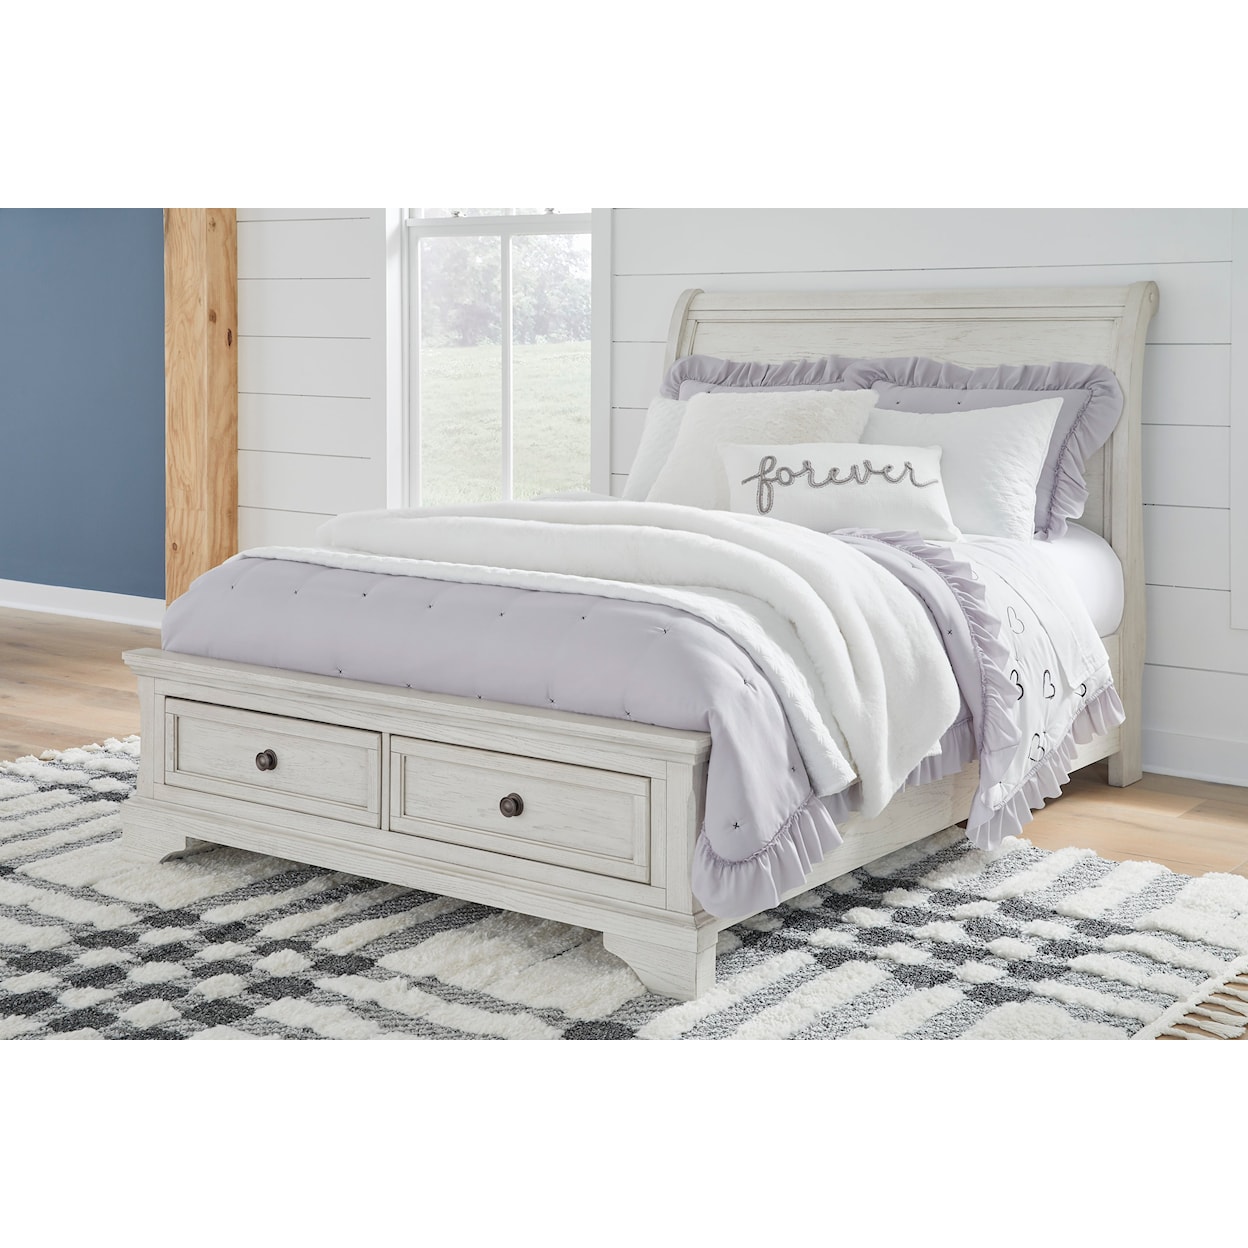 Signature Design by Ashley Furniture Robbinsdale Full Sleigh Bed with Storage